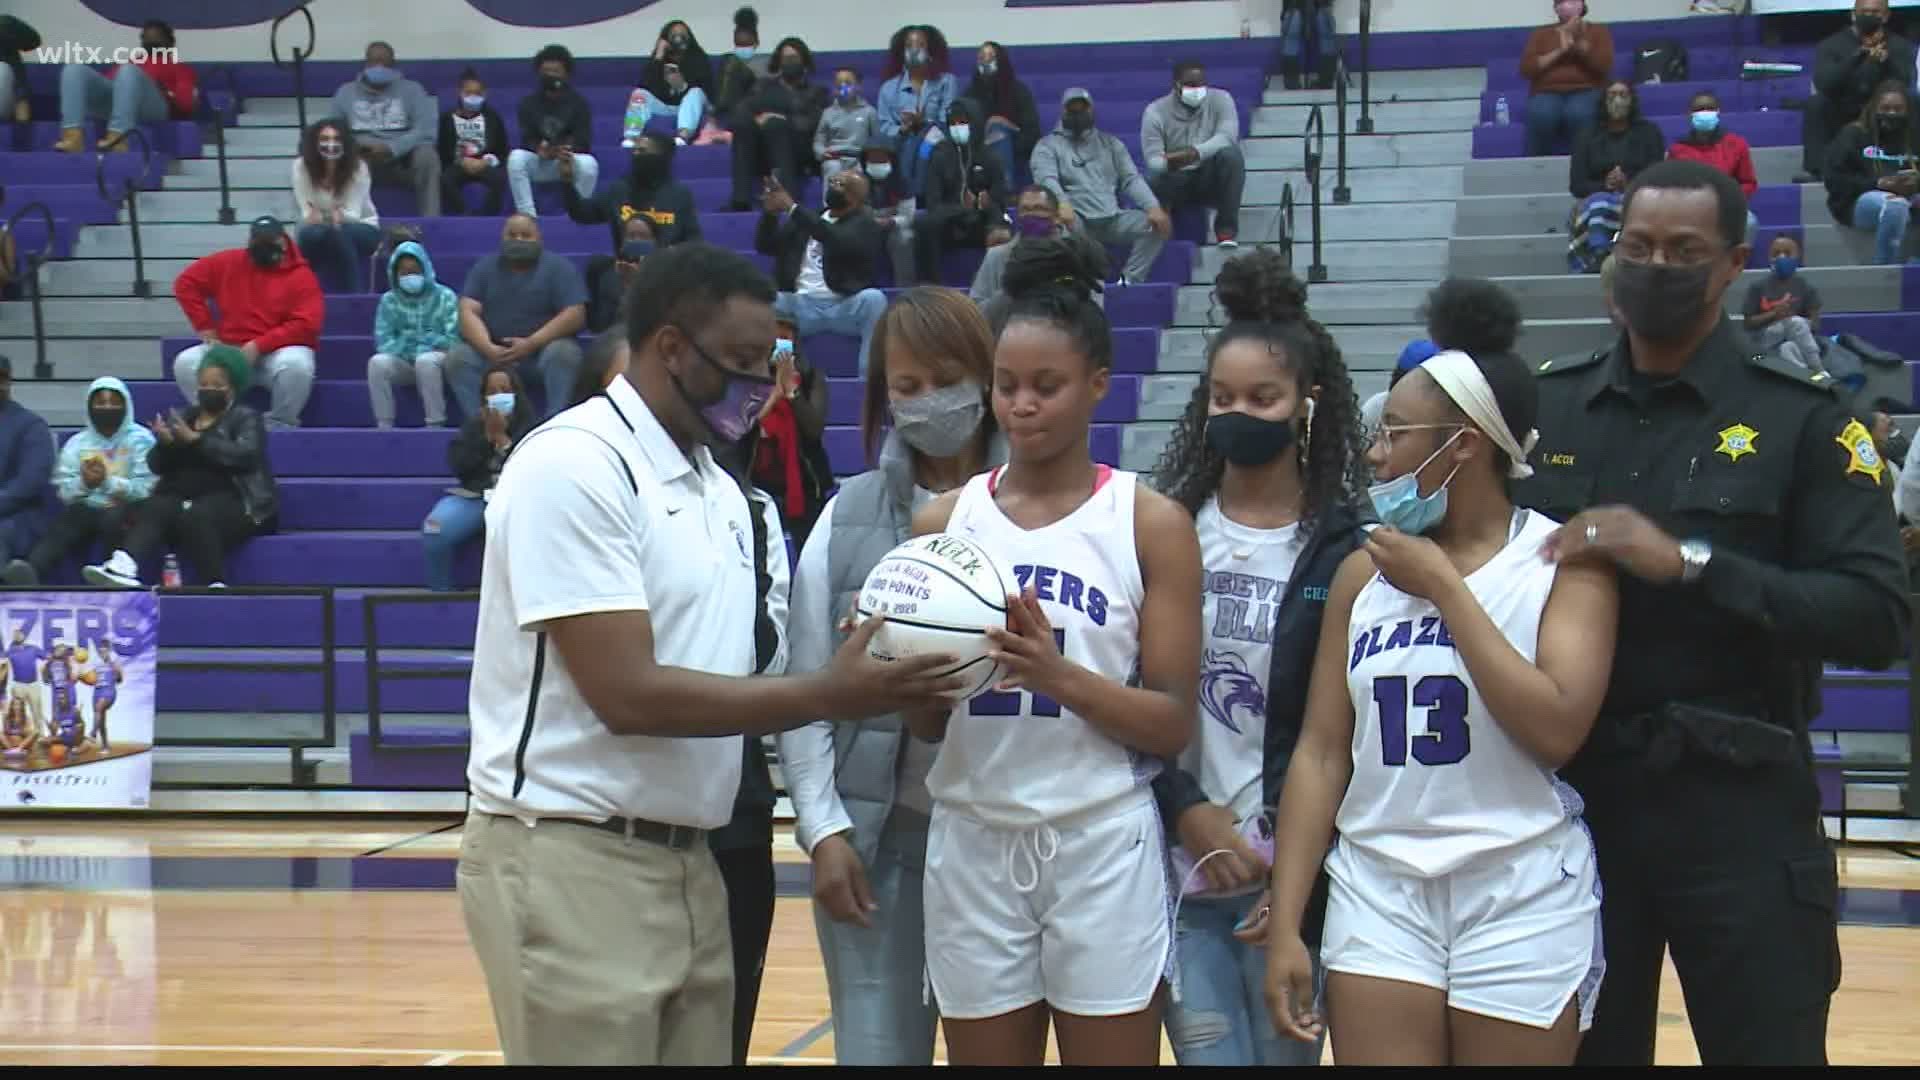 Ridge View senior Laila Acox is the first News19 Player of the Week in this new year of 2021.